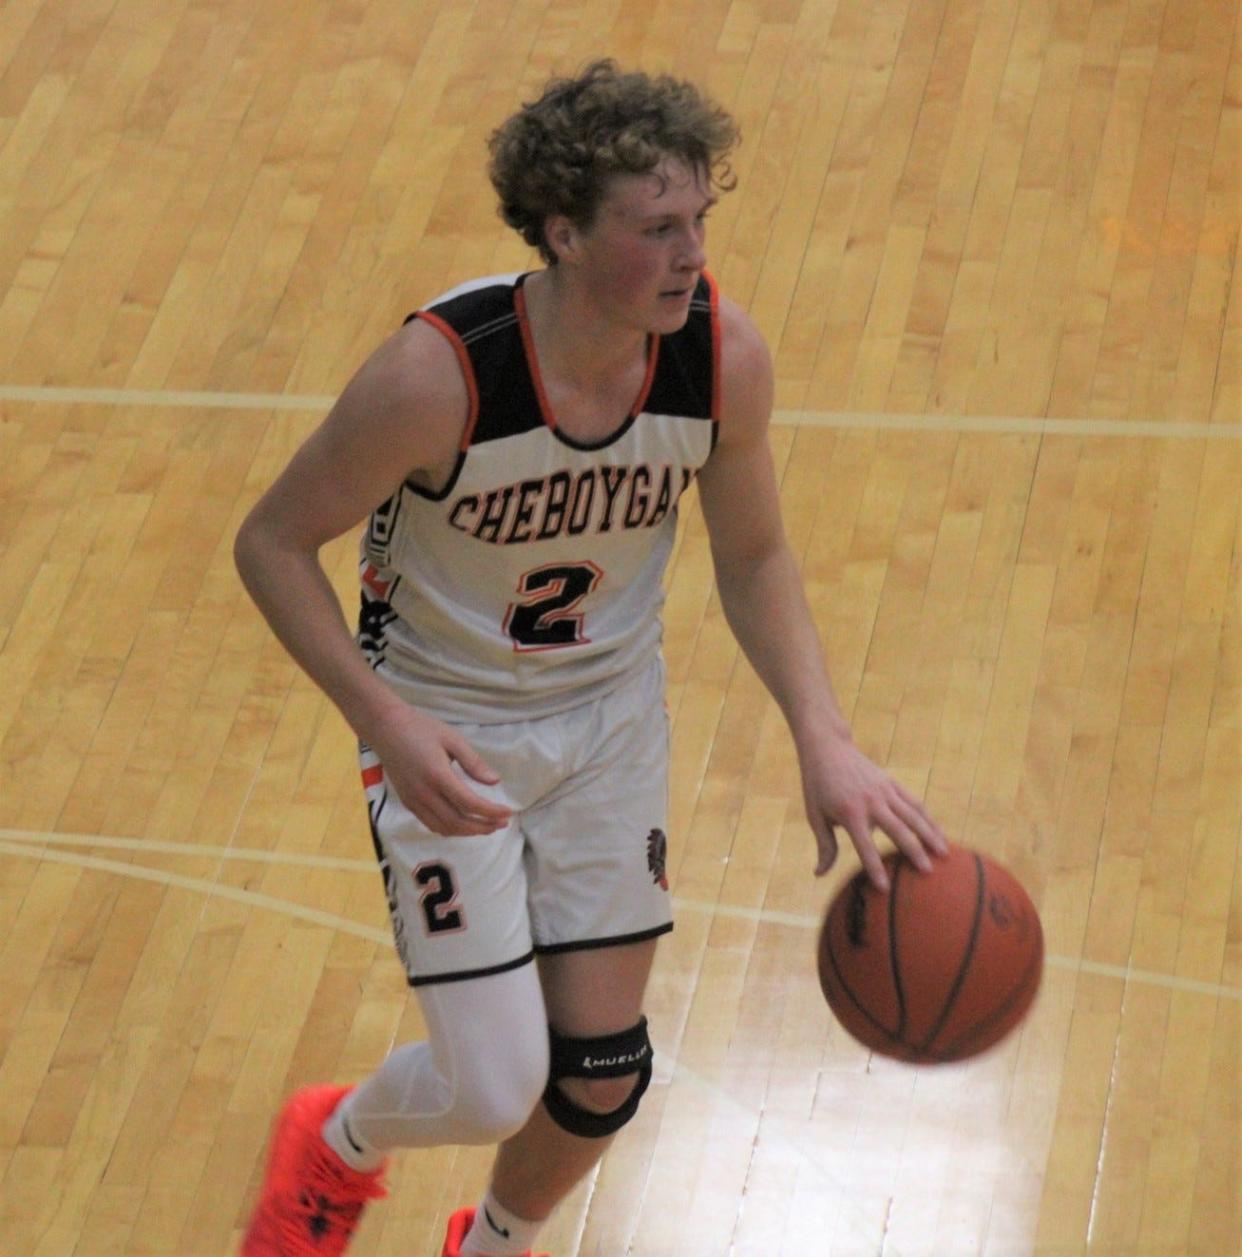 Cheboygan senior guard Connor Gibbons made a career-high eight 3-pointers and finished with a career-high 26 points to help spark the Chiefs in a victory at East Jordan on Thursday.